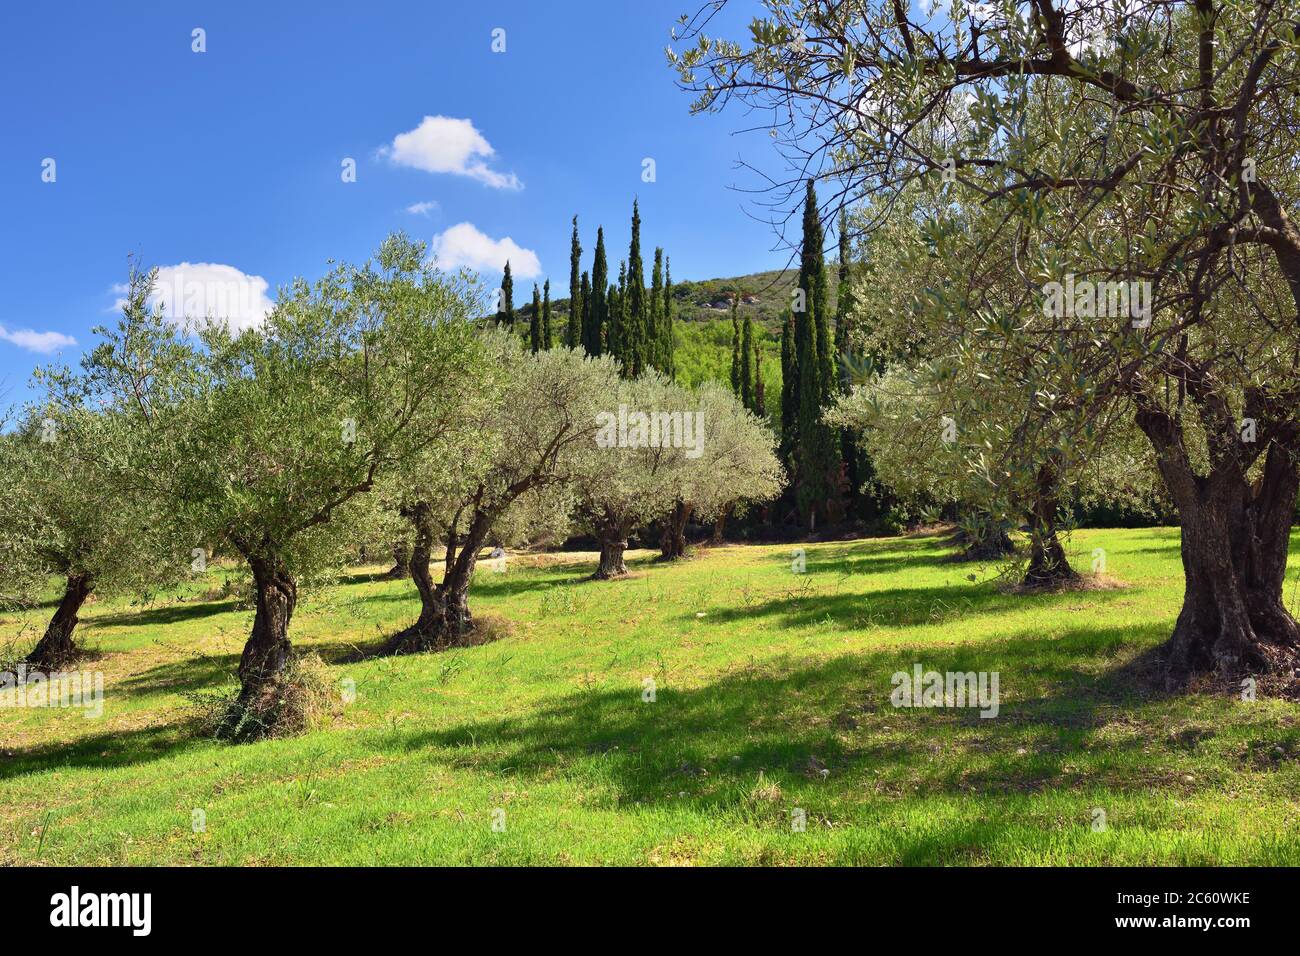 Idyllic rural landscape with olives trees and cypress on background, Nemea region, Peloponnese, Greece, Europe. Stock Photo